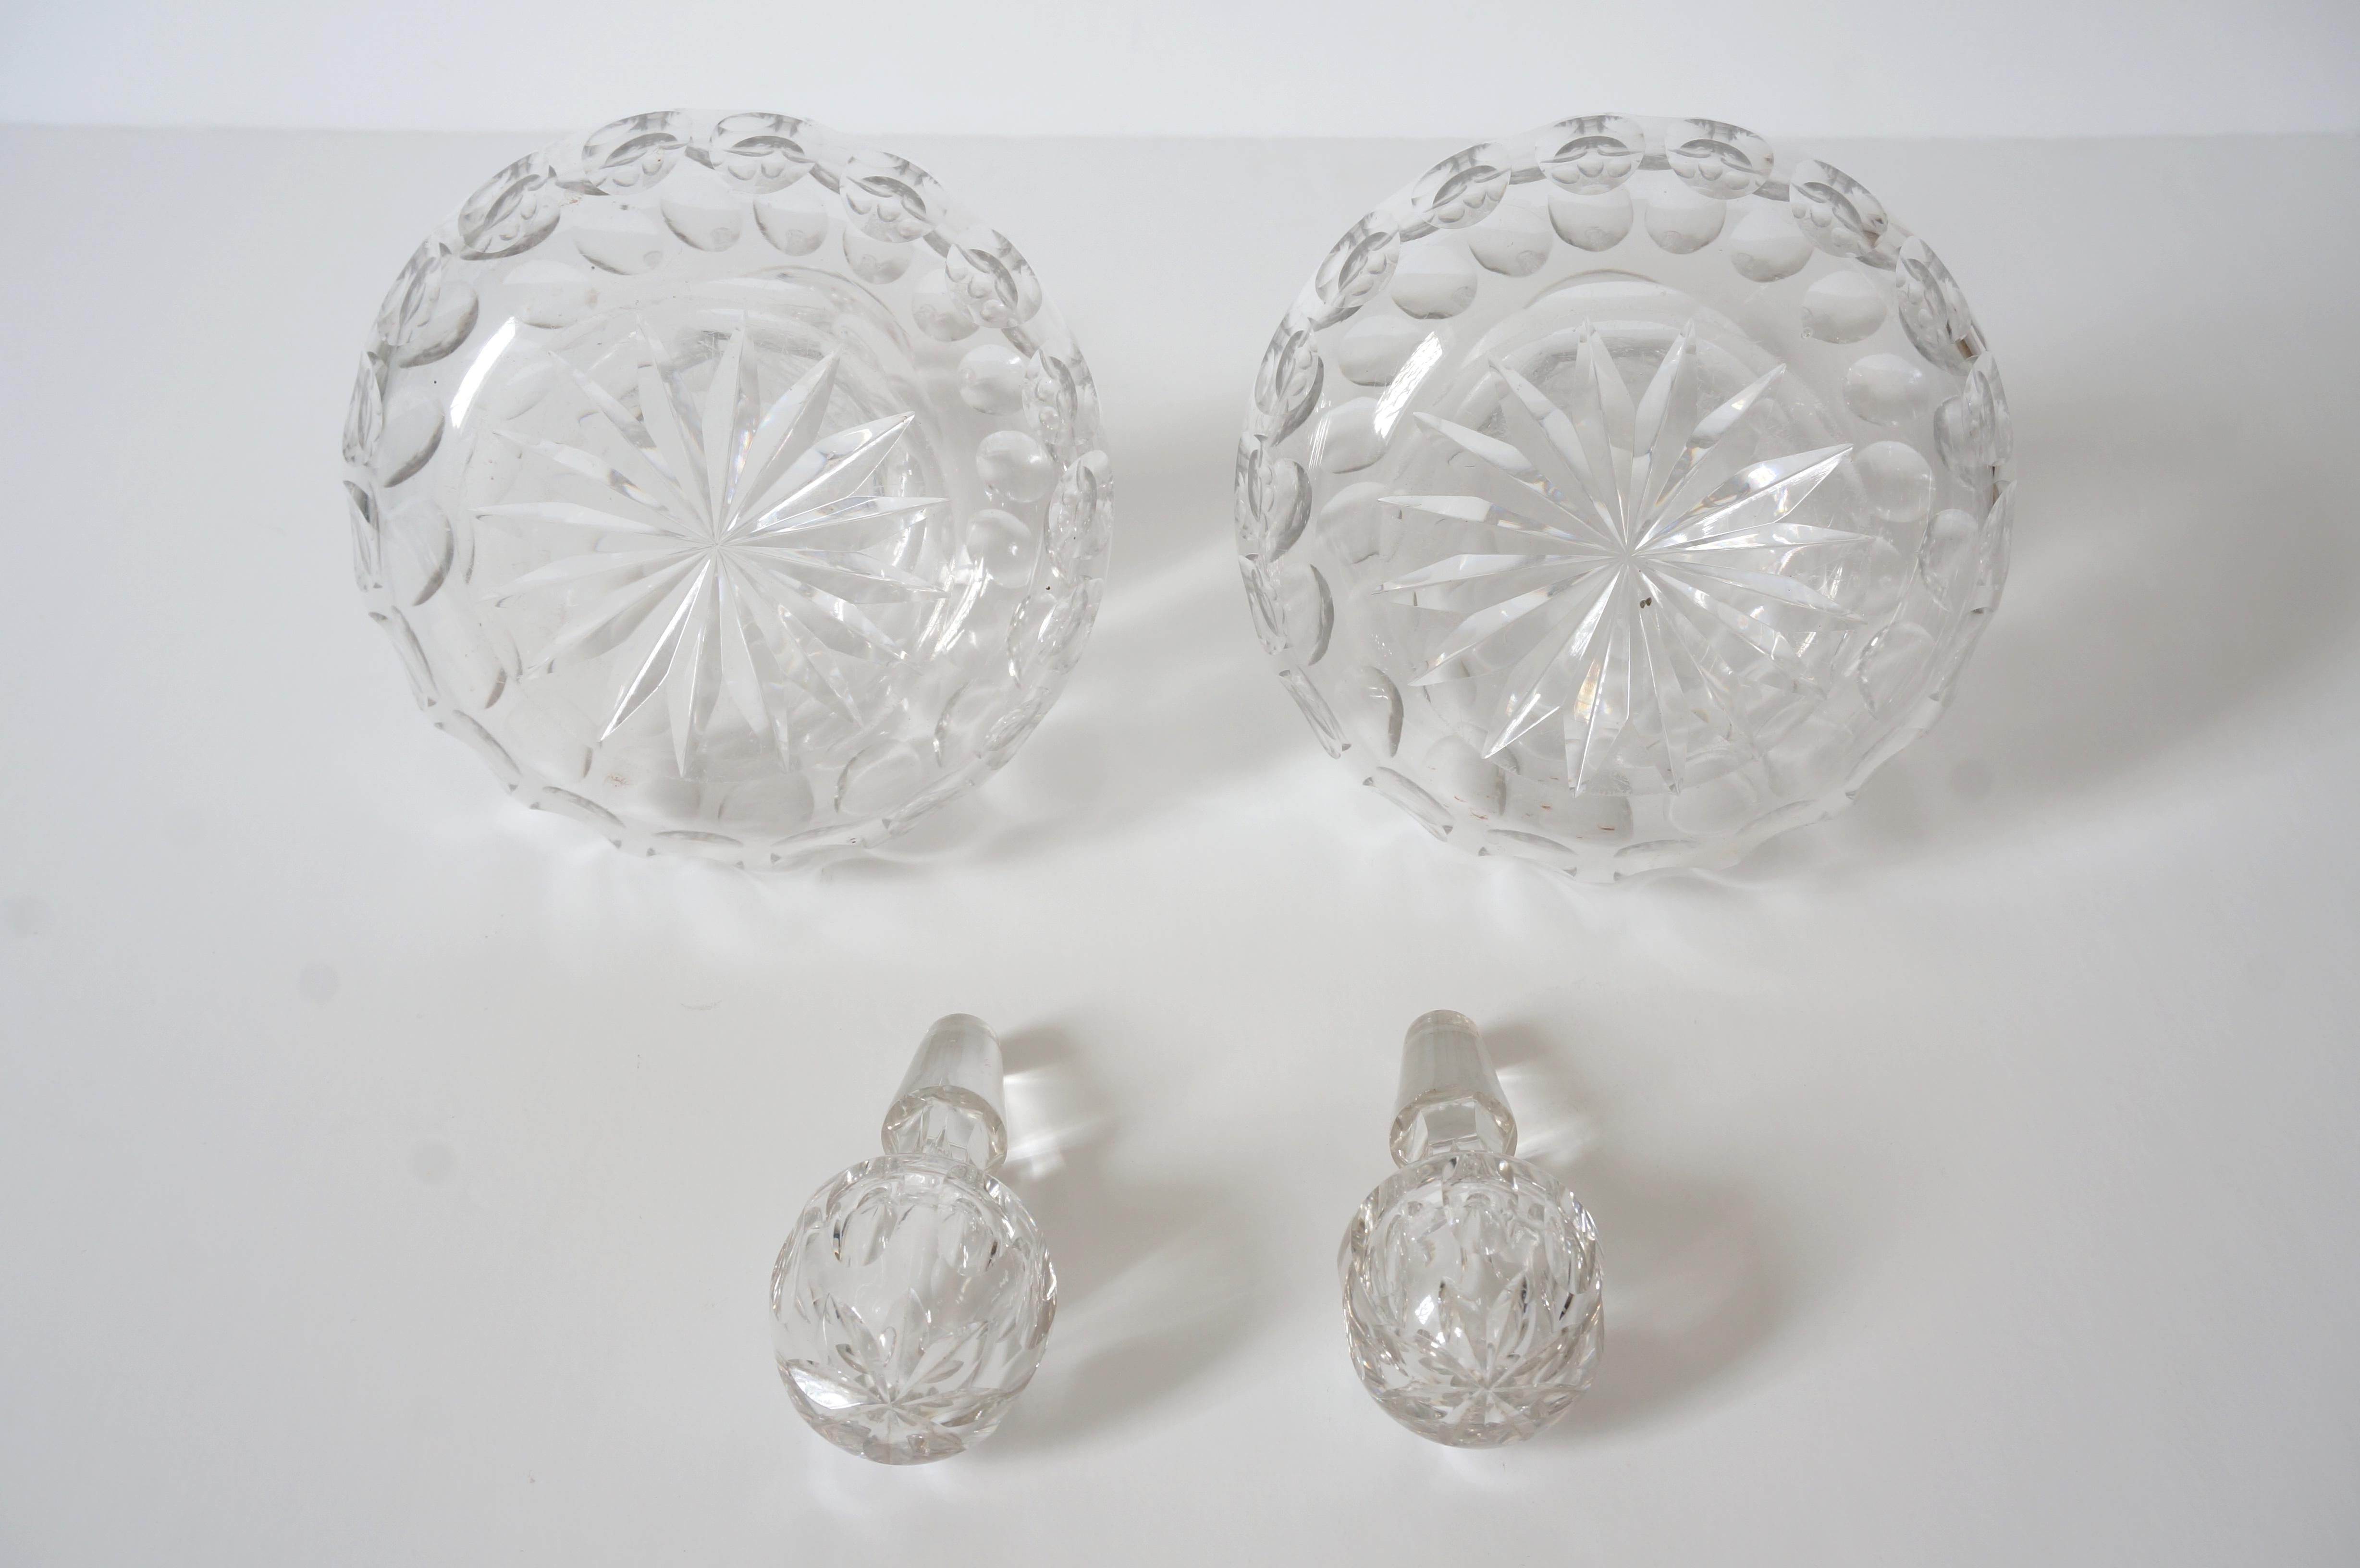 Hand-Crafted Set of Two Cut Crystal English Regency Style Decanters For Sale